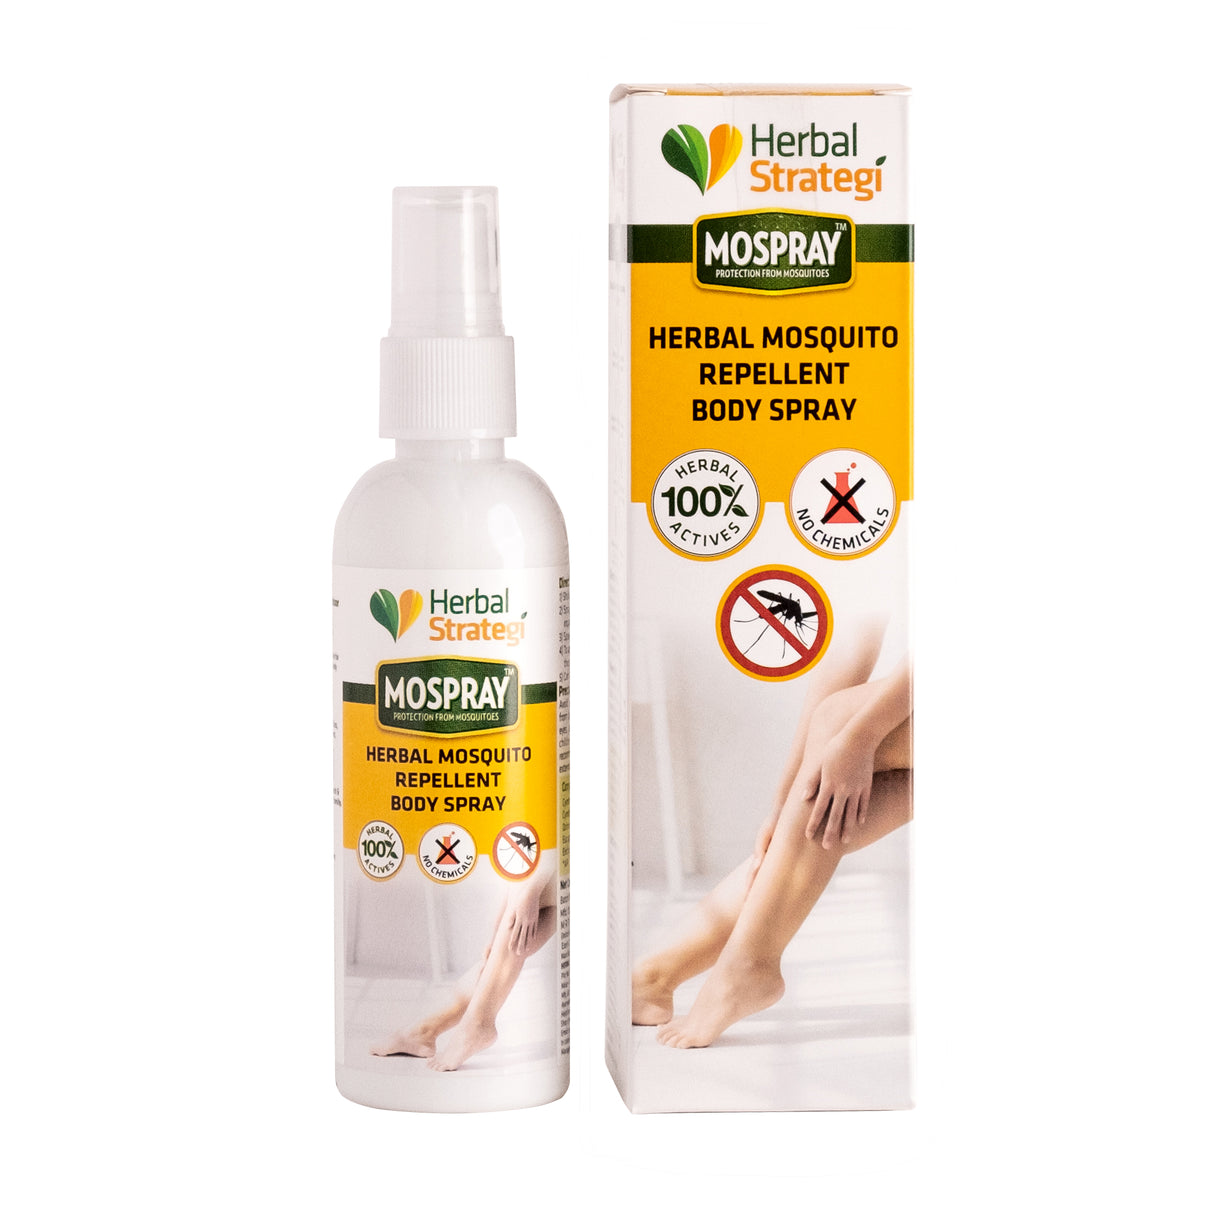 Herbal Mosquito Repellent Body Spray | Product Size: 100 ml, 500 ml, 5 ltrs